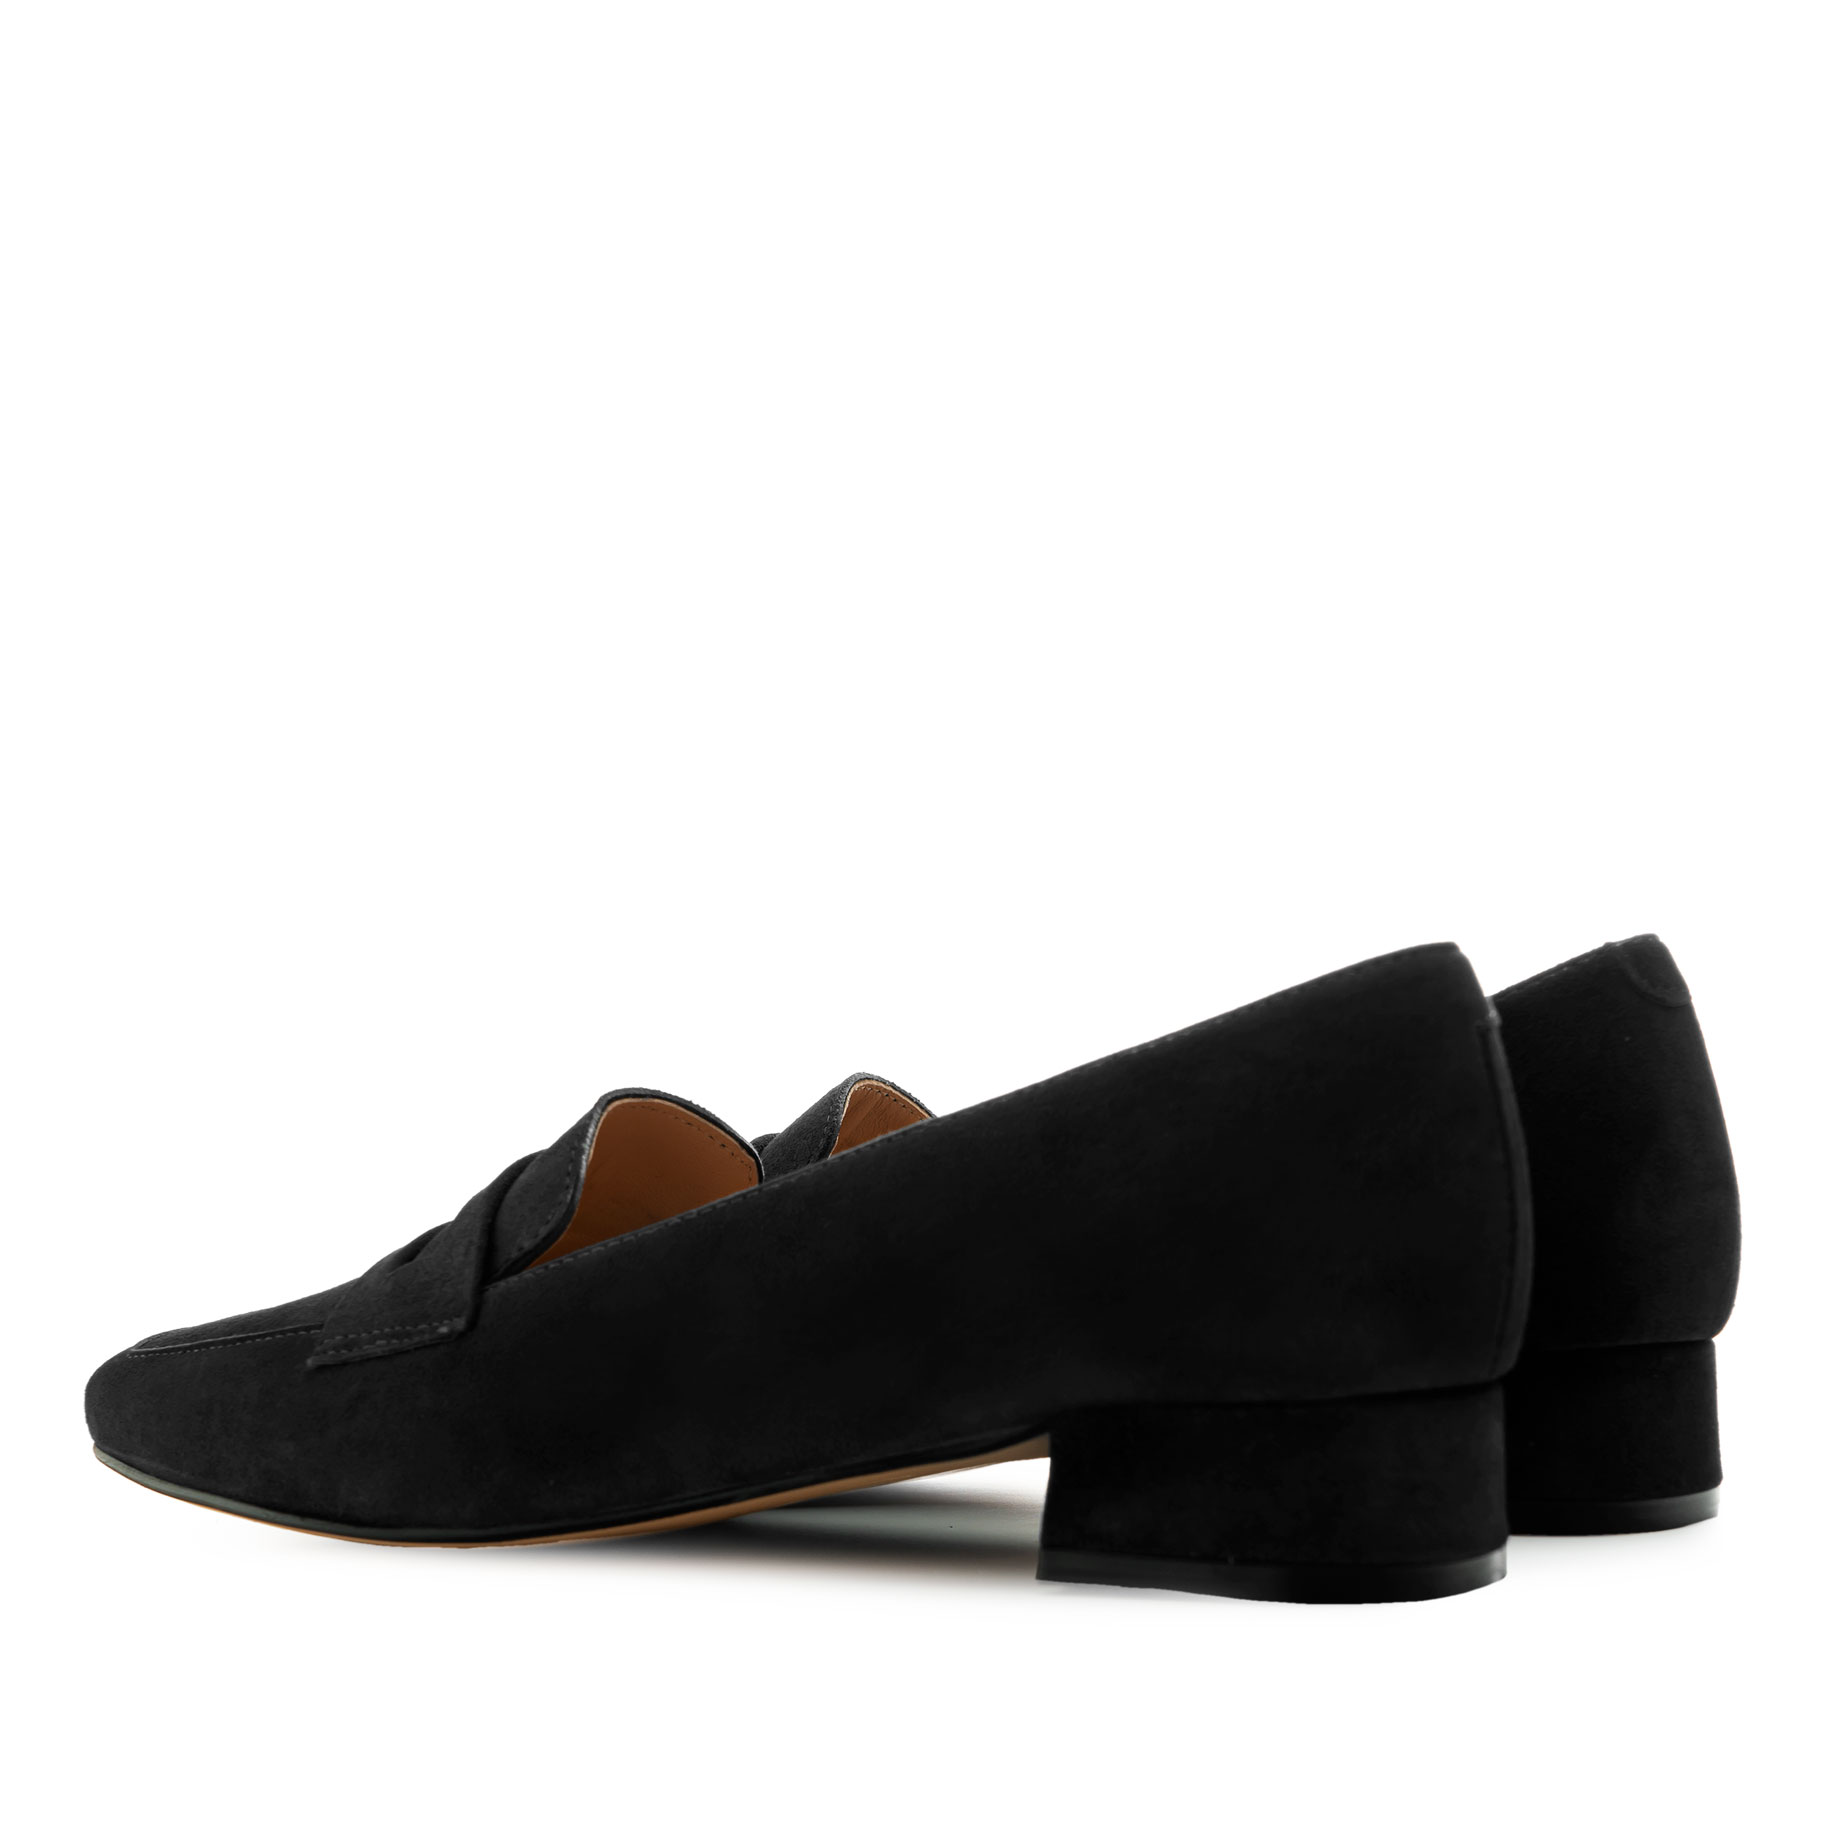 Moccasins in Black Suede Leather 